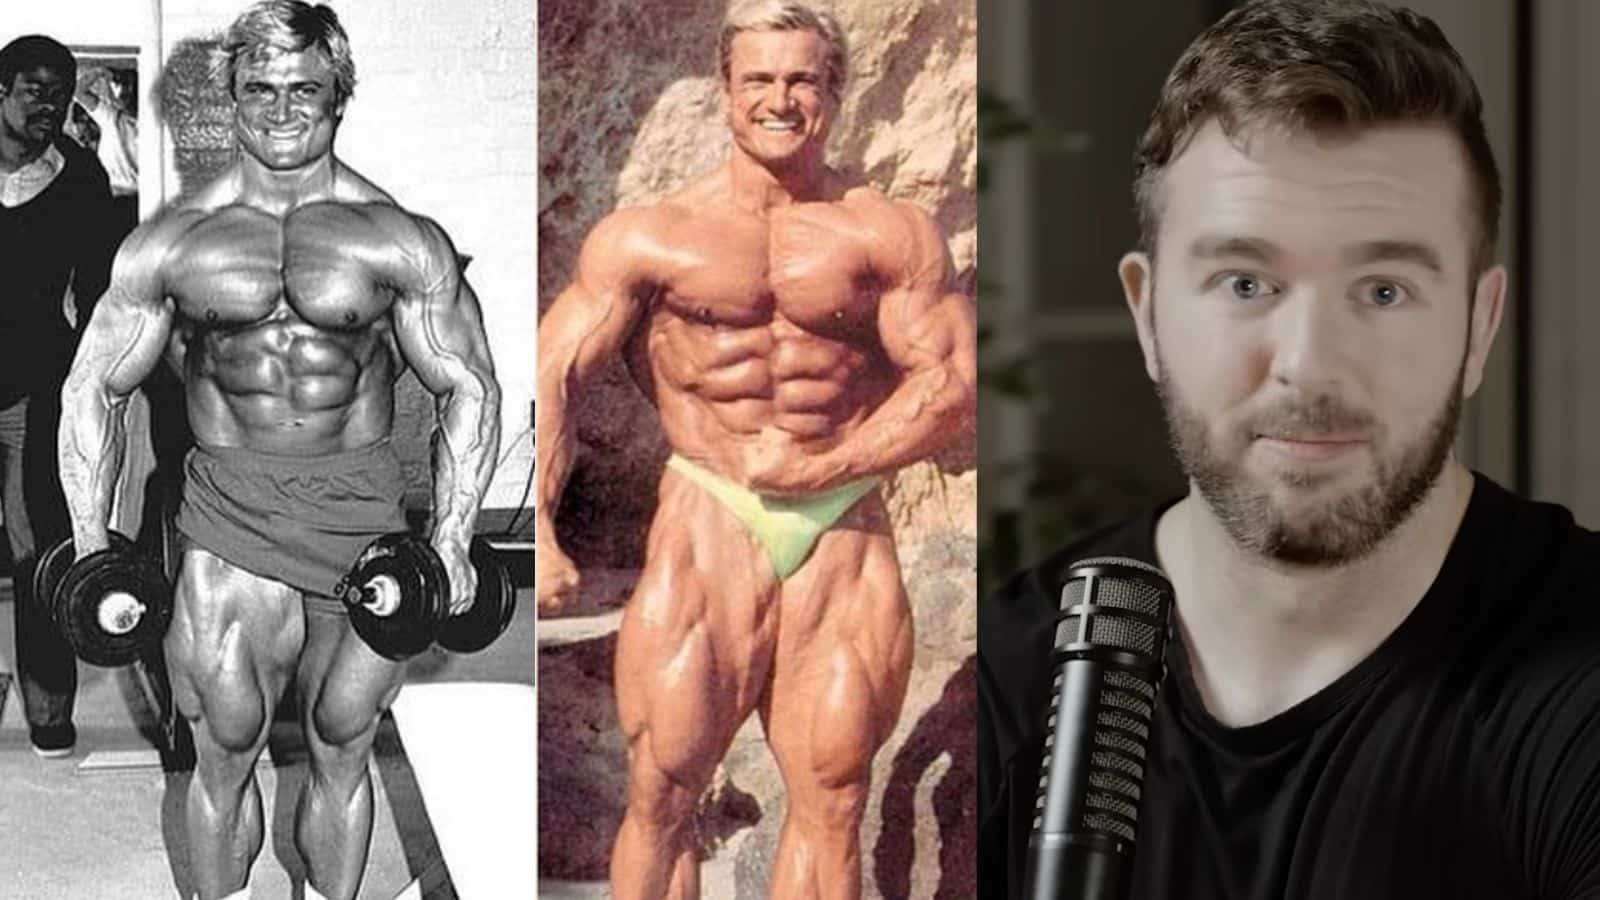 Derek of MPMD Says Tom Platz 'Changed His Story' on Steroids: "I Just Can't Believe You" - Fitness Volt